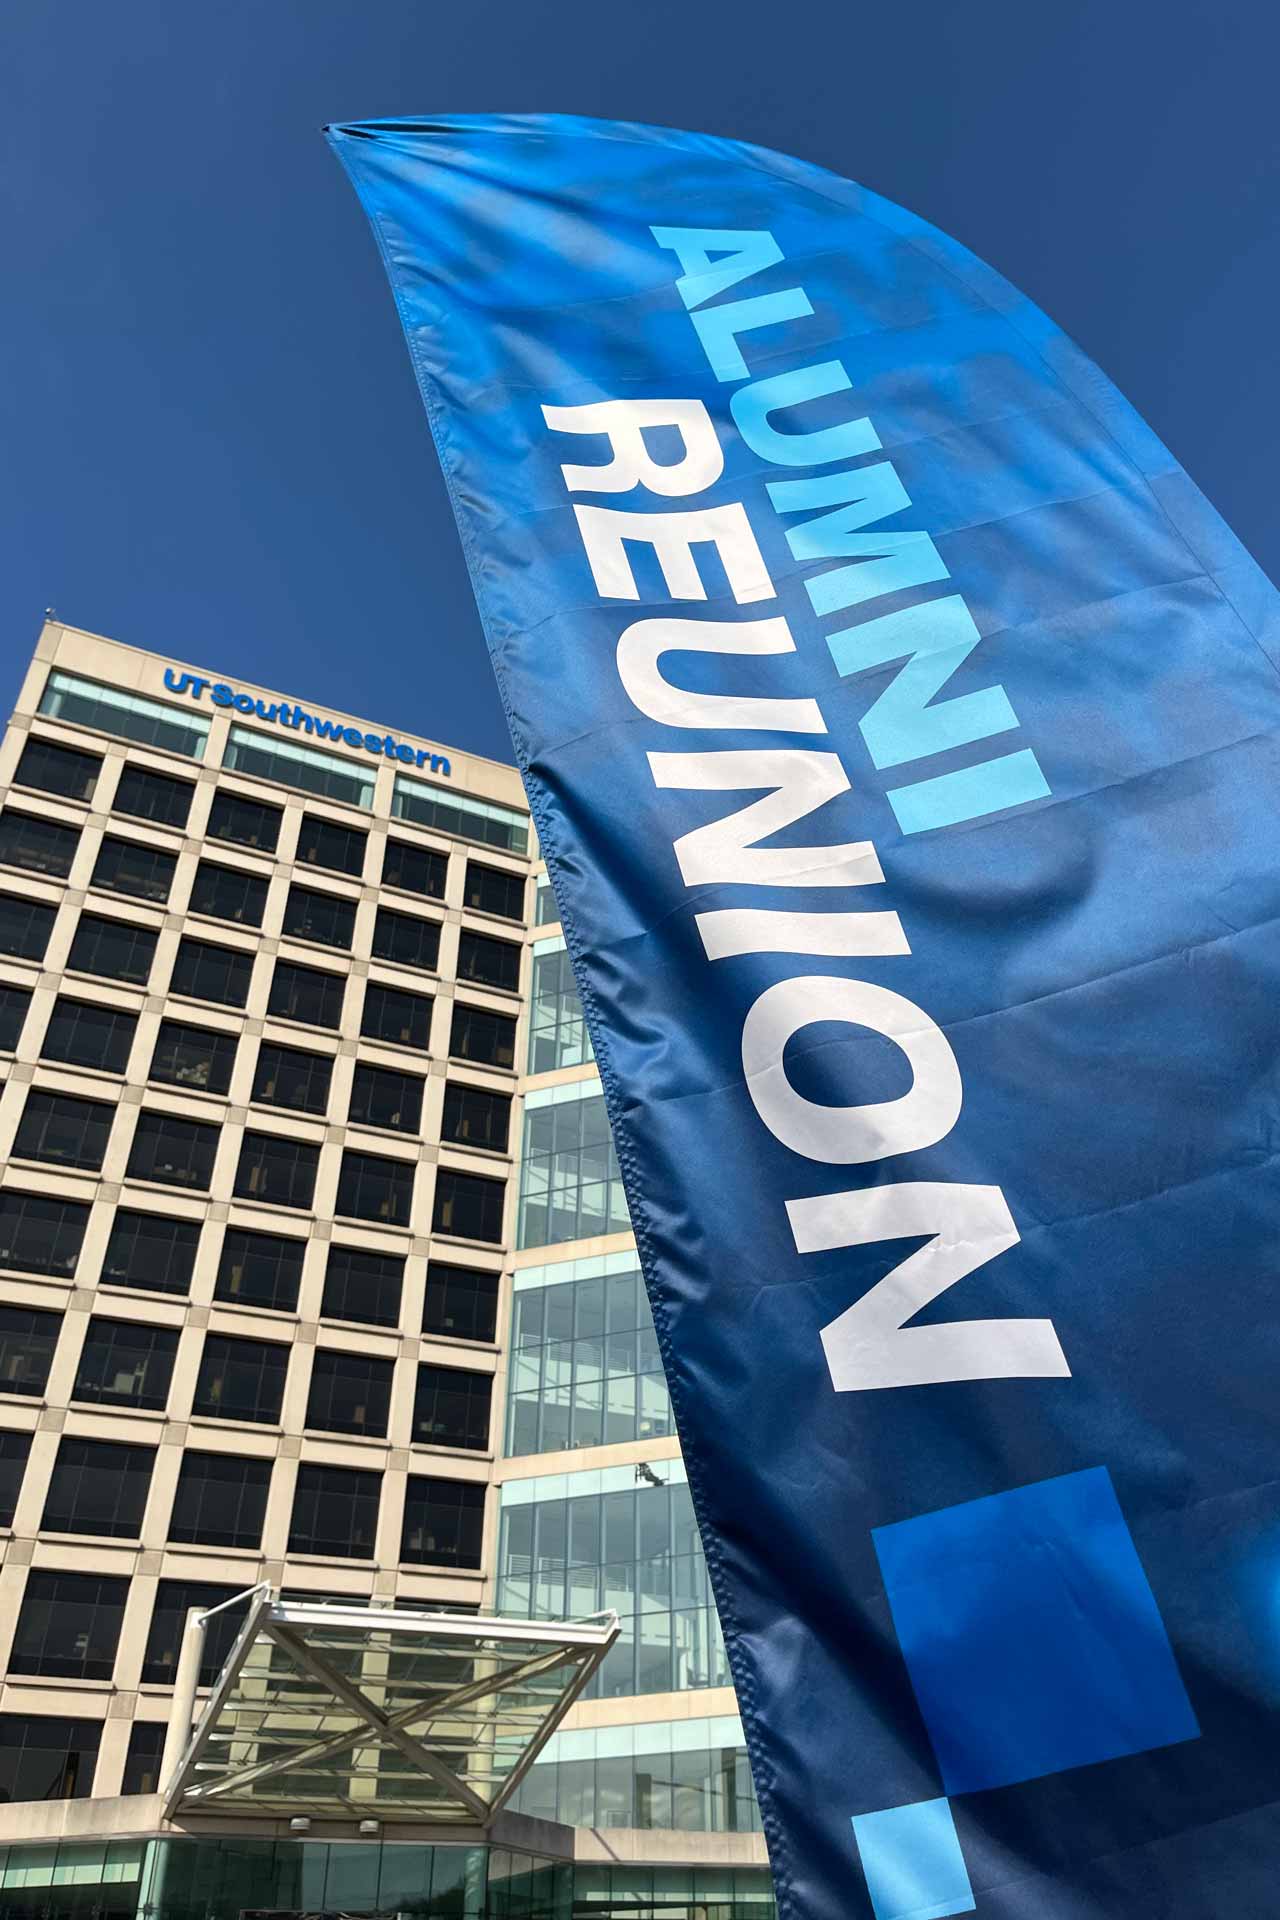 A blue banner with the words Alumni Reunion stands in front of a 14-story building. Across the top of the building is a sign that reads 'UT Southwestern.'